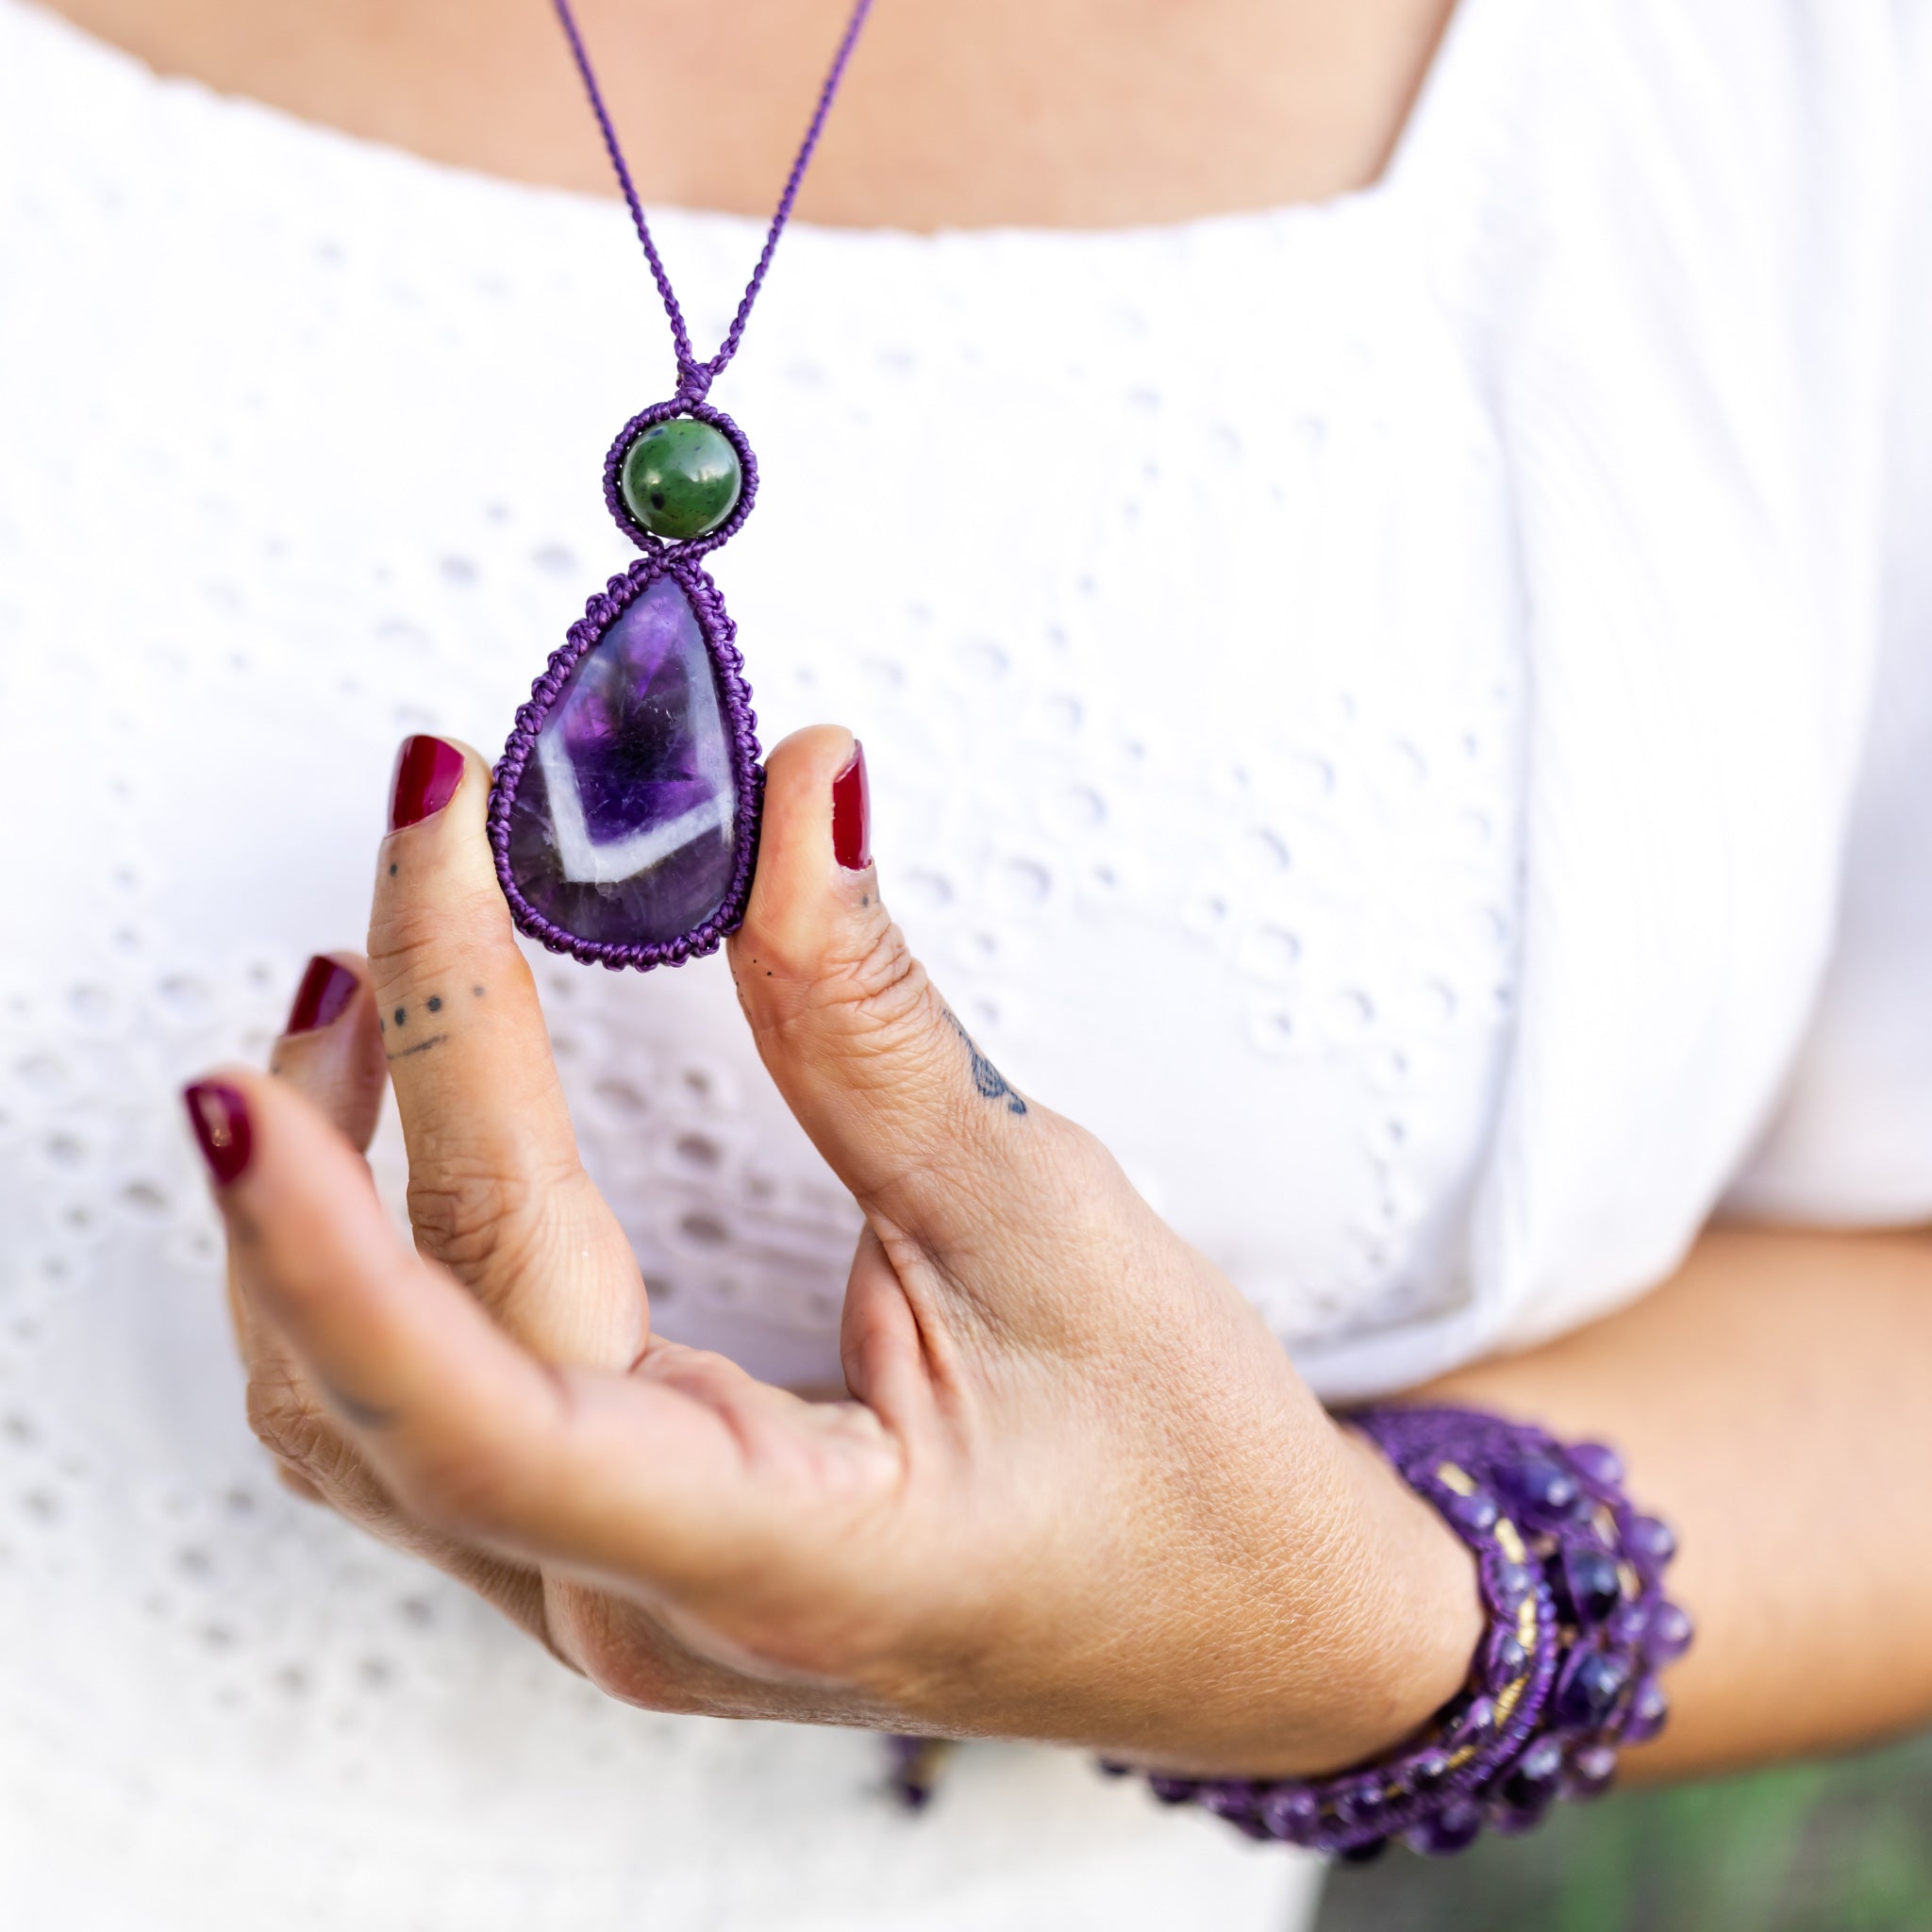 Mystic Duet necklaces are a combination of two gemstones crystals, for healing, astrological signs and beauty